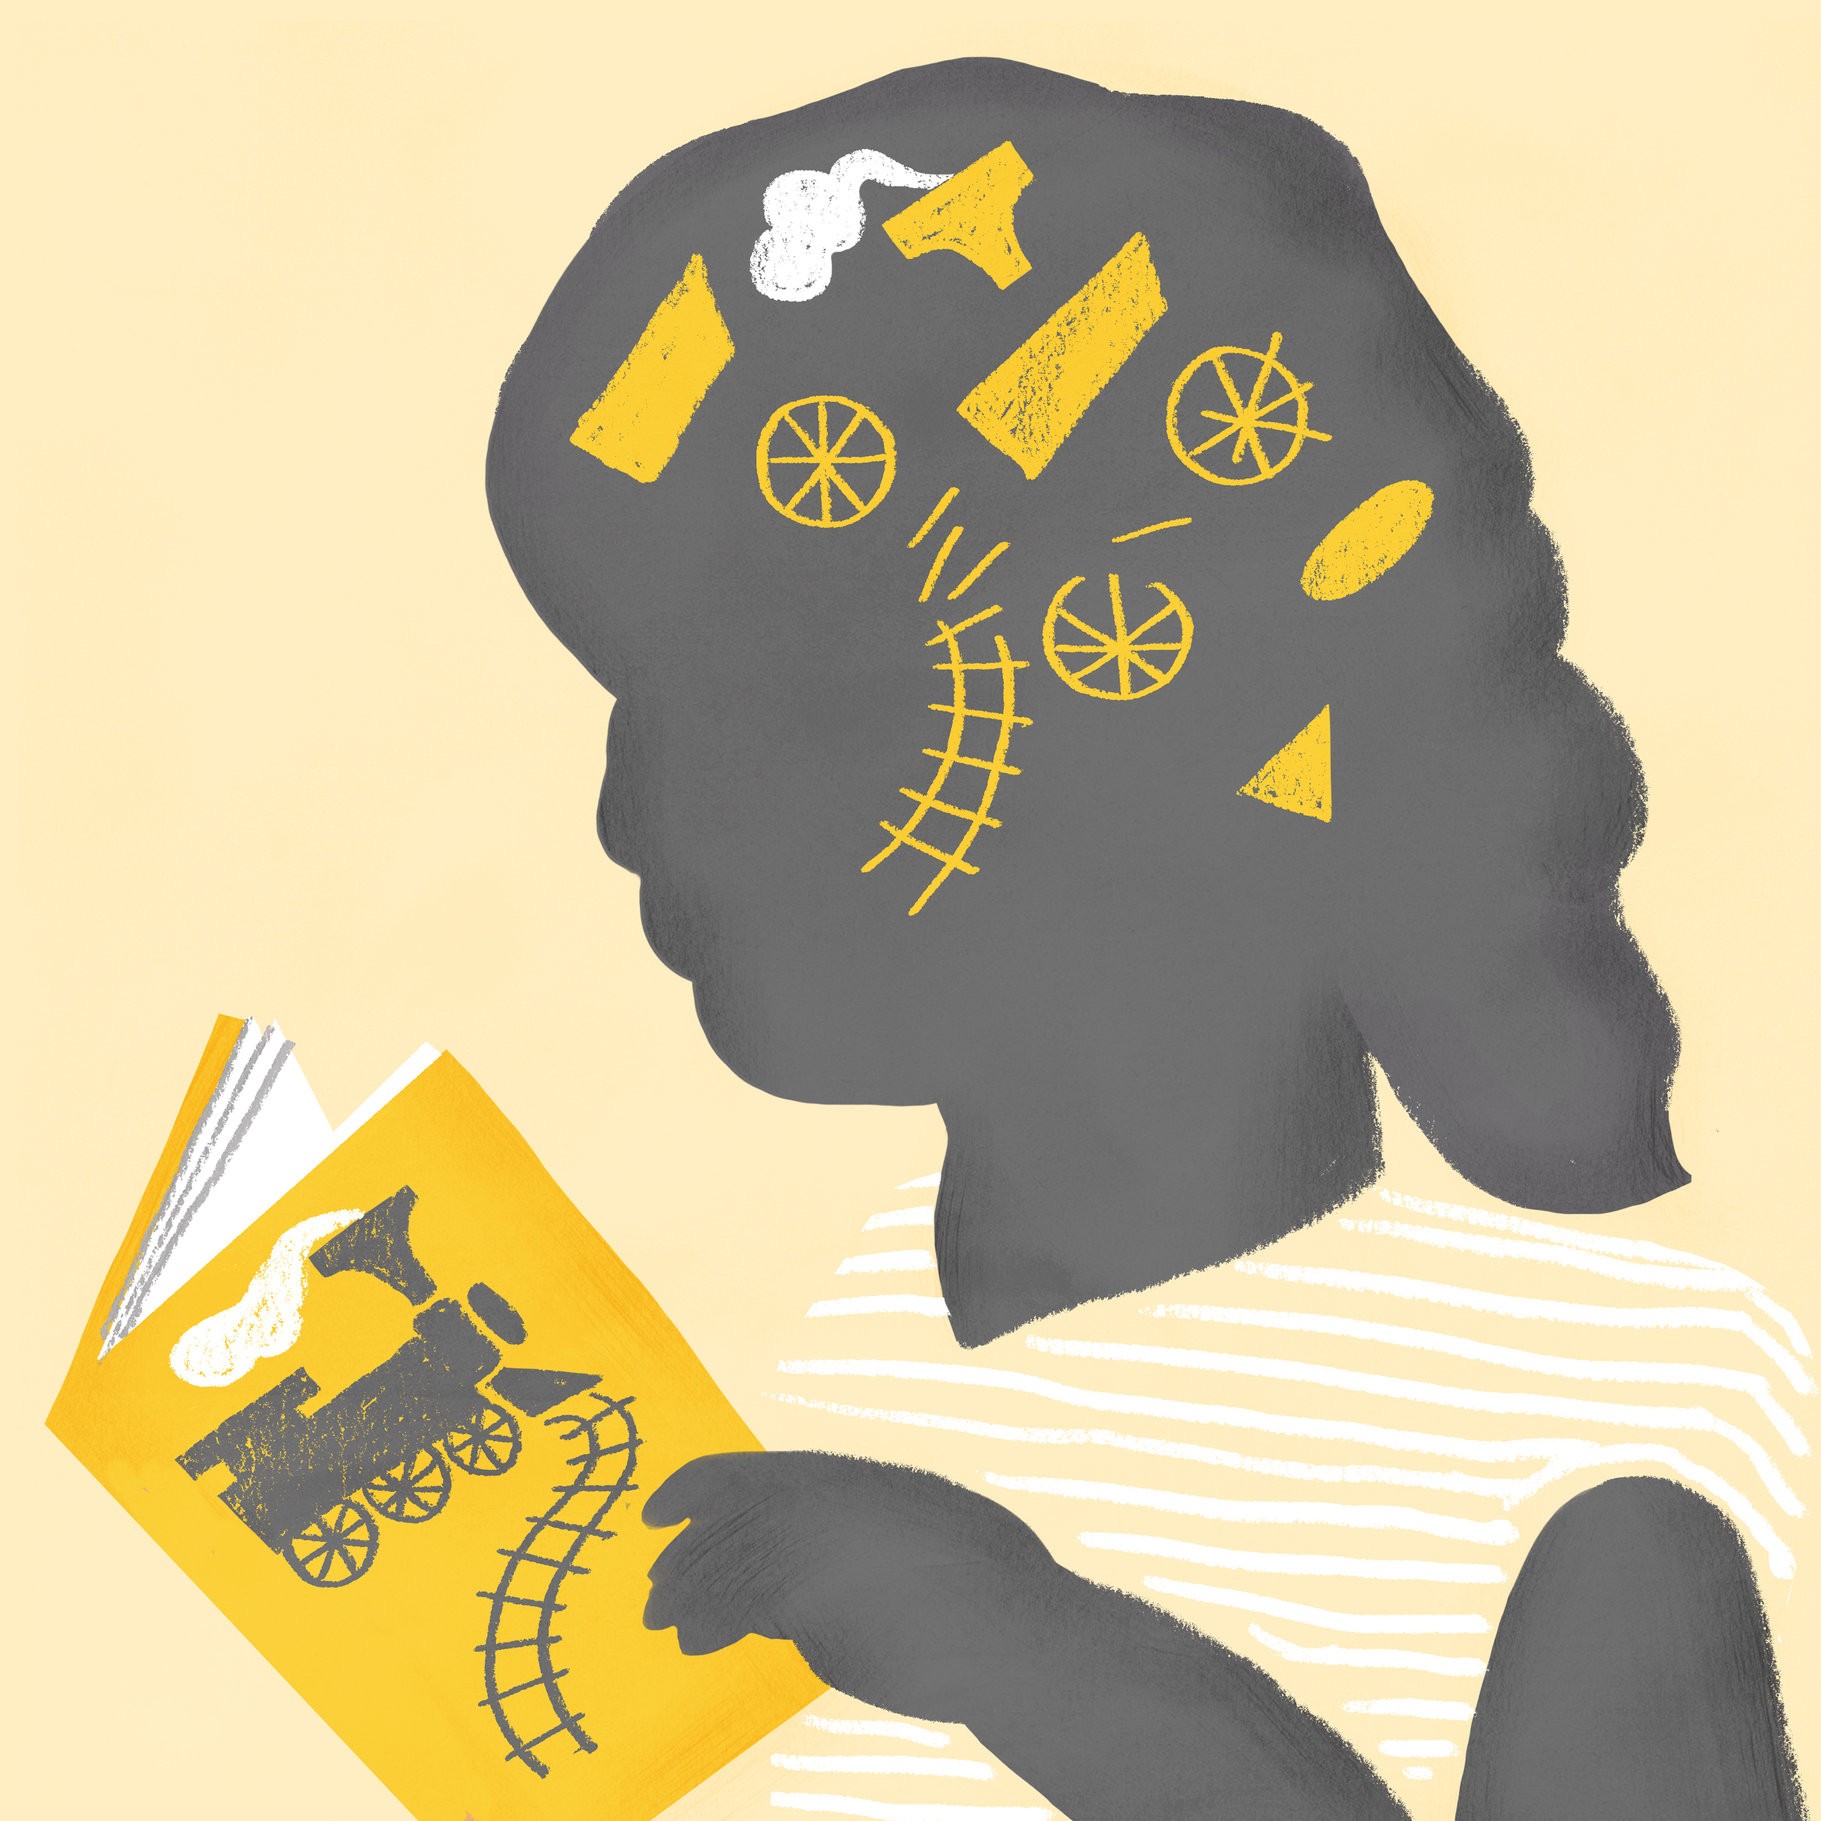 Illustration of girl reading a book with a train on the ocver and ideas in illustrated in her mind